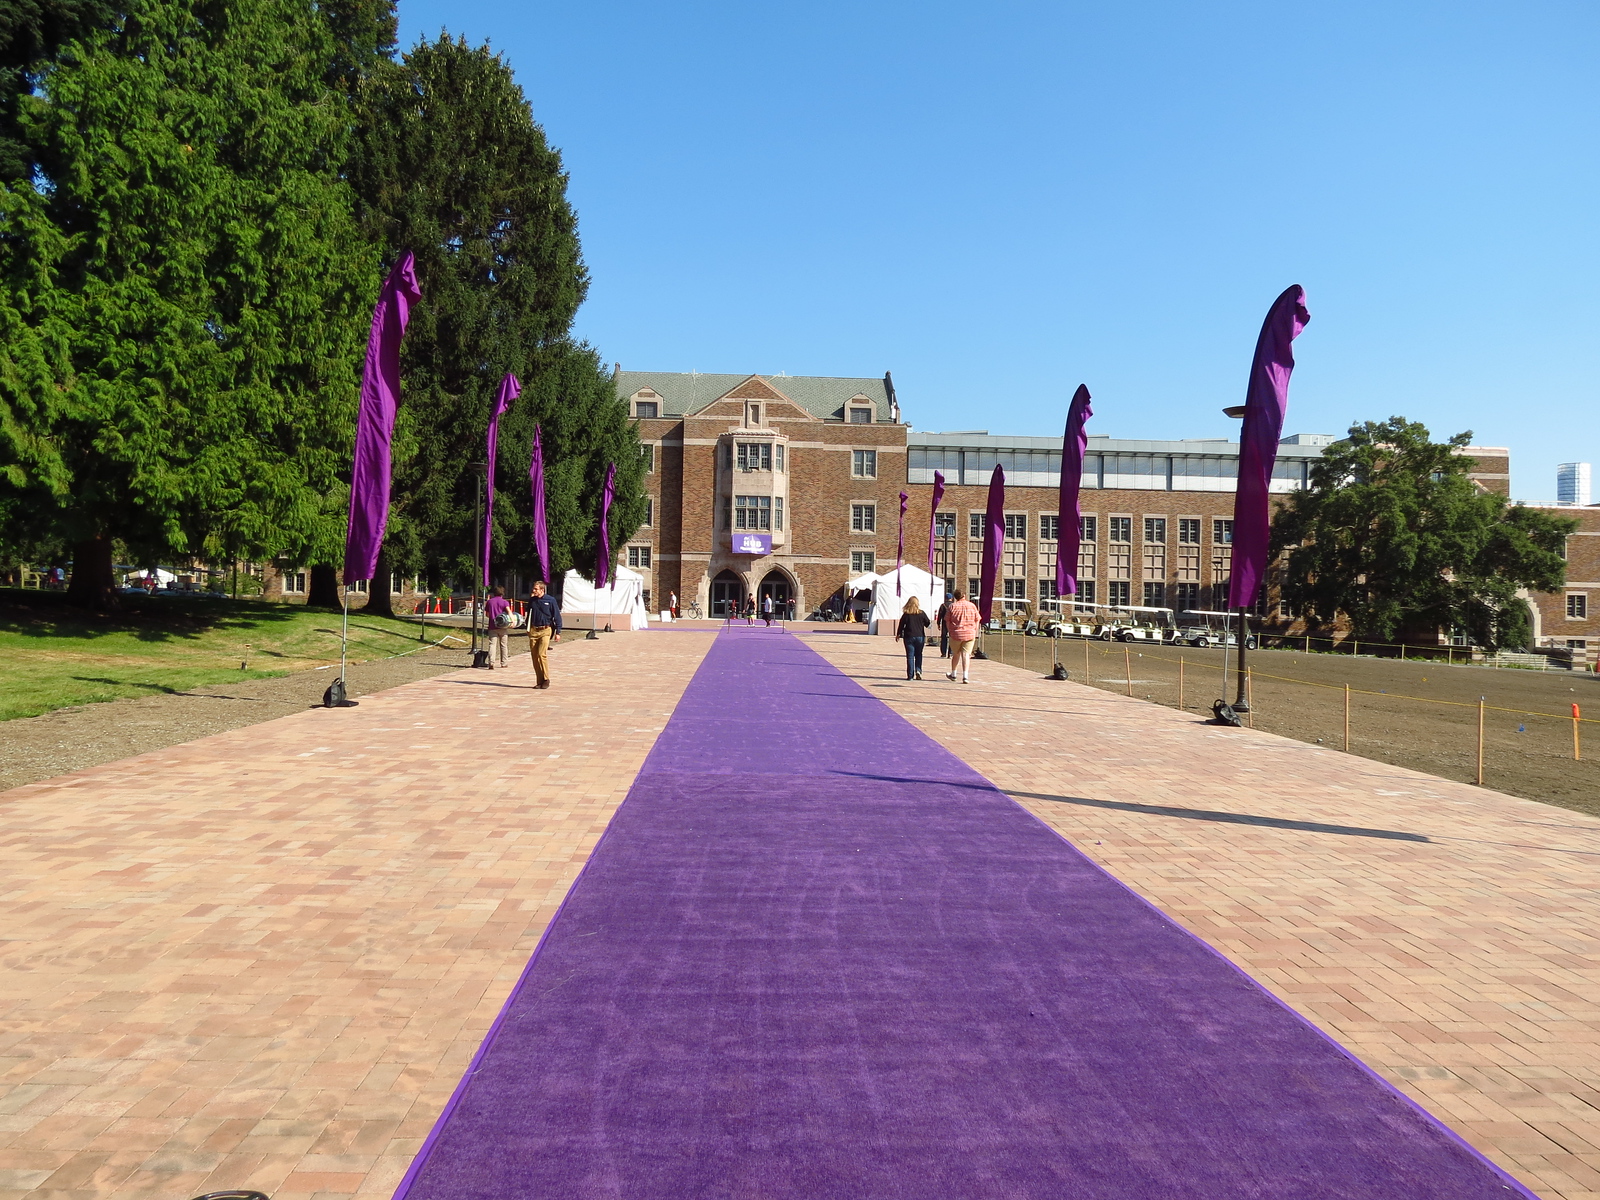 A purple carpet stretches into the distance